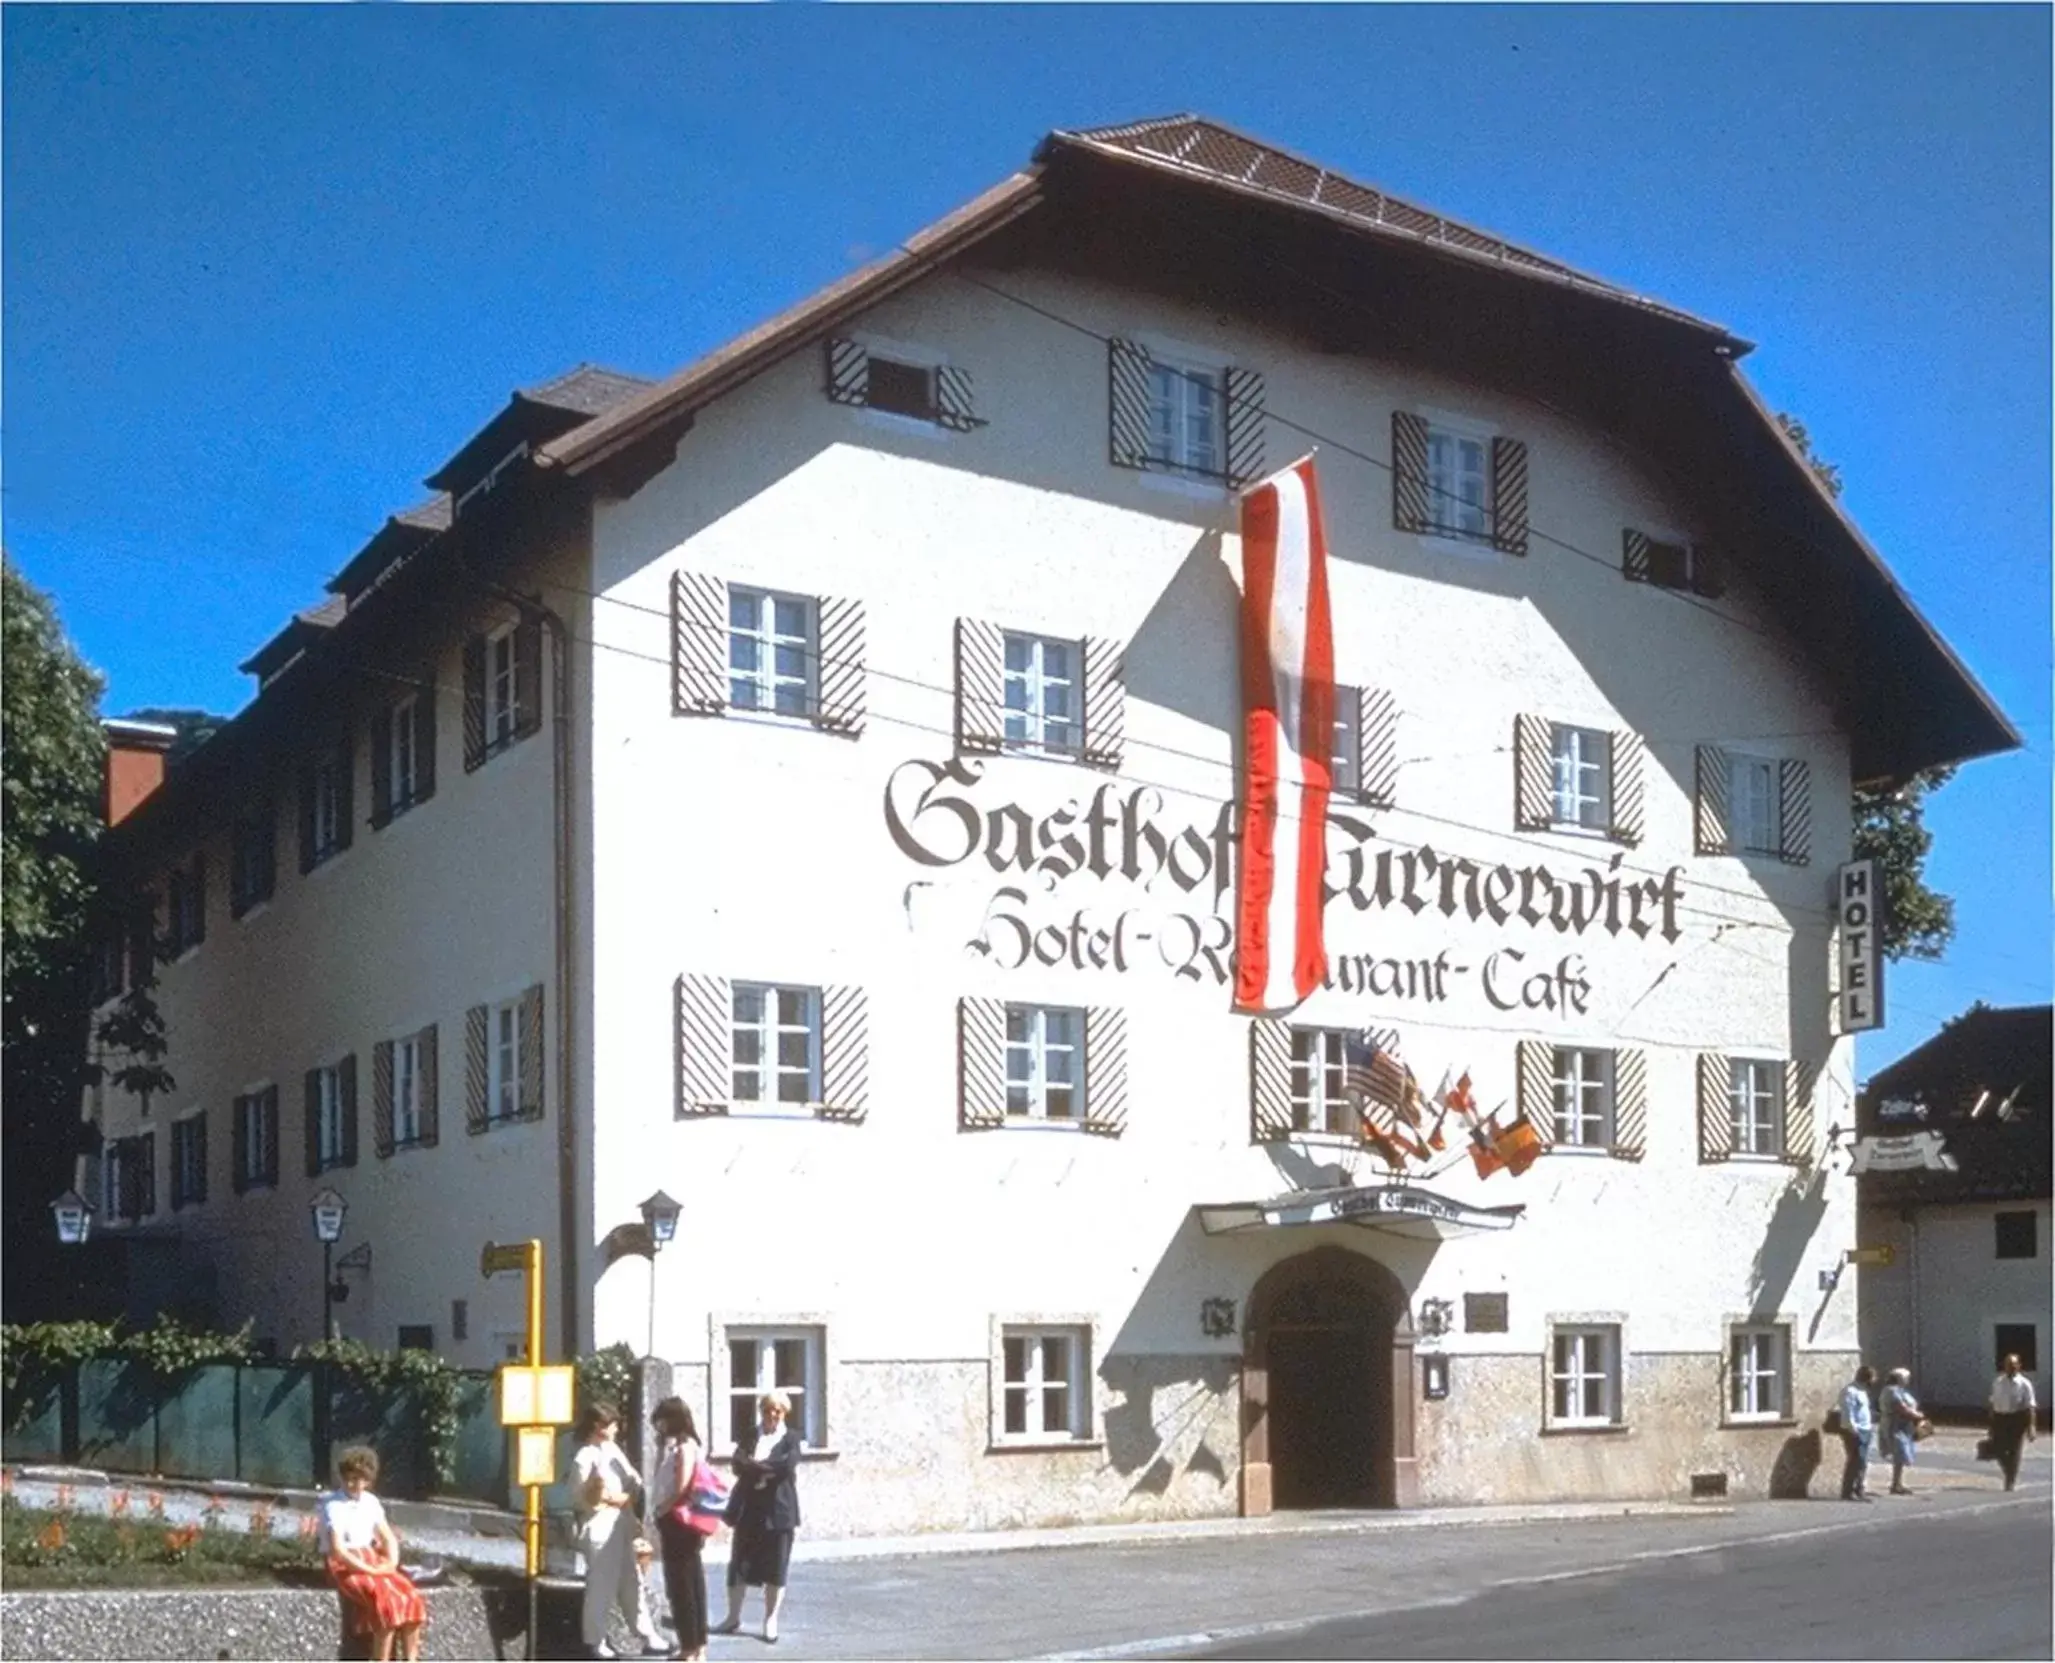 Property Building in Hotel Turnerwirt